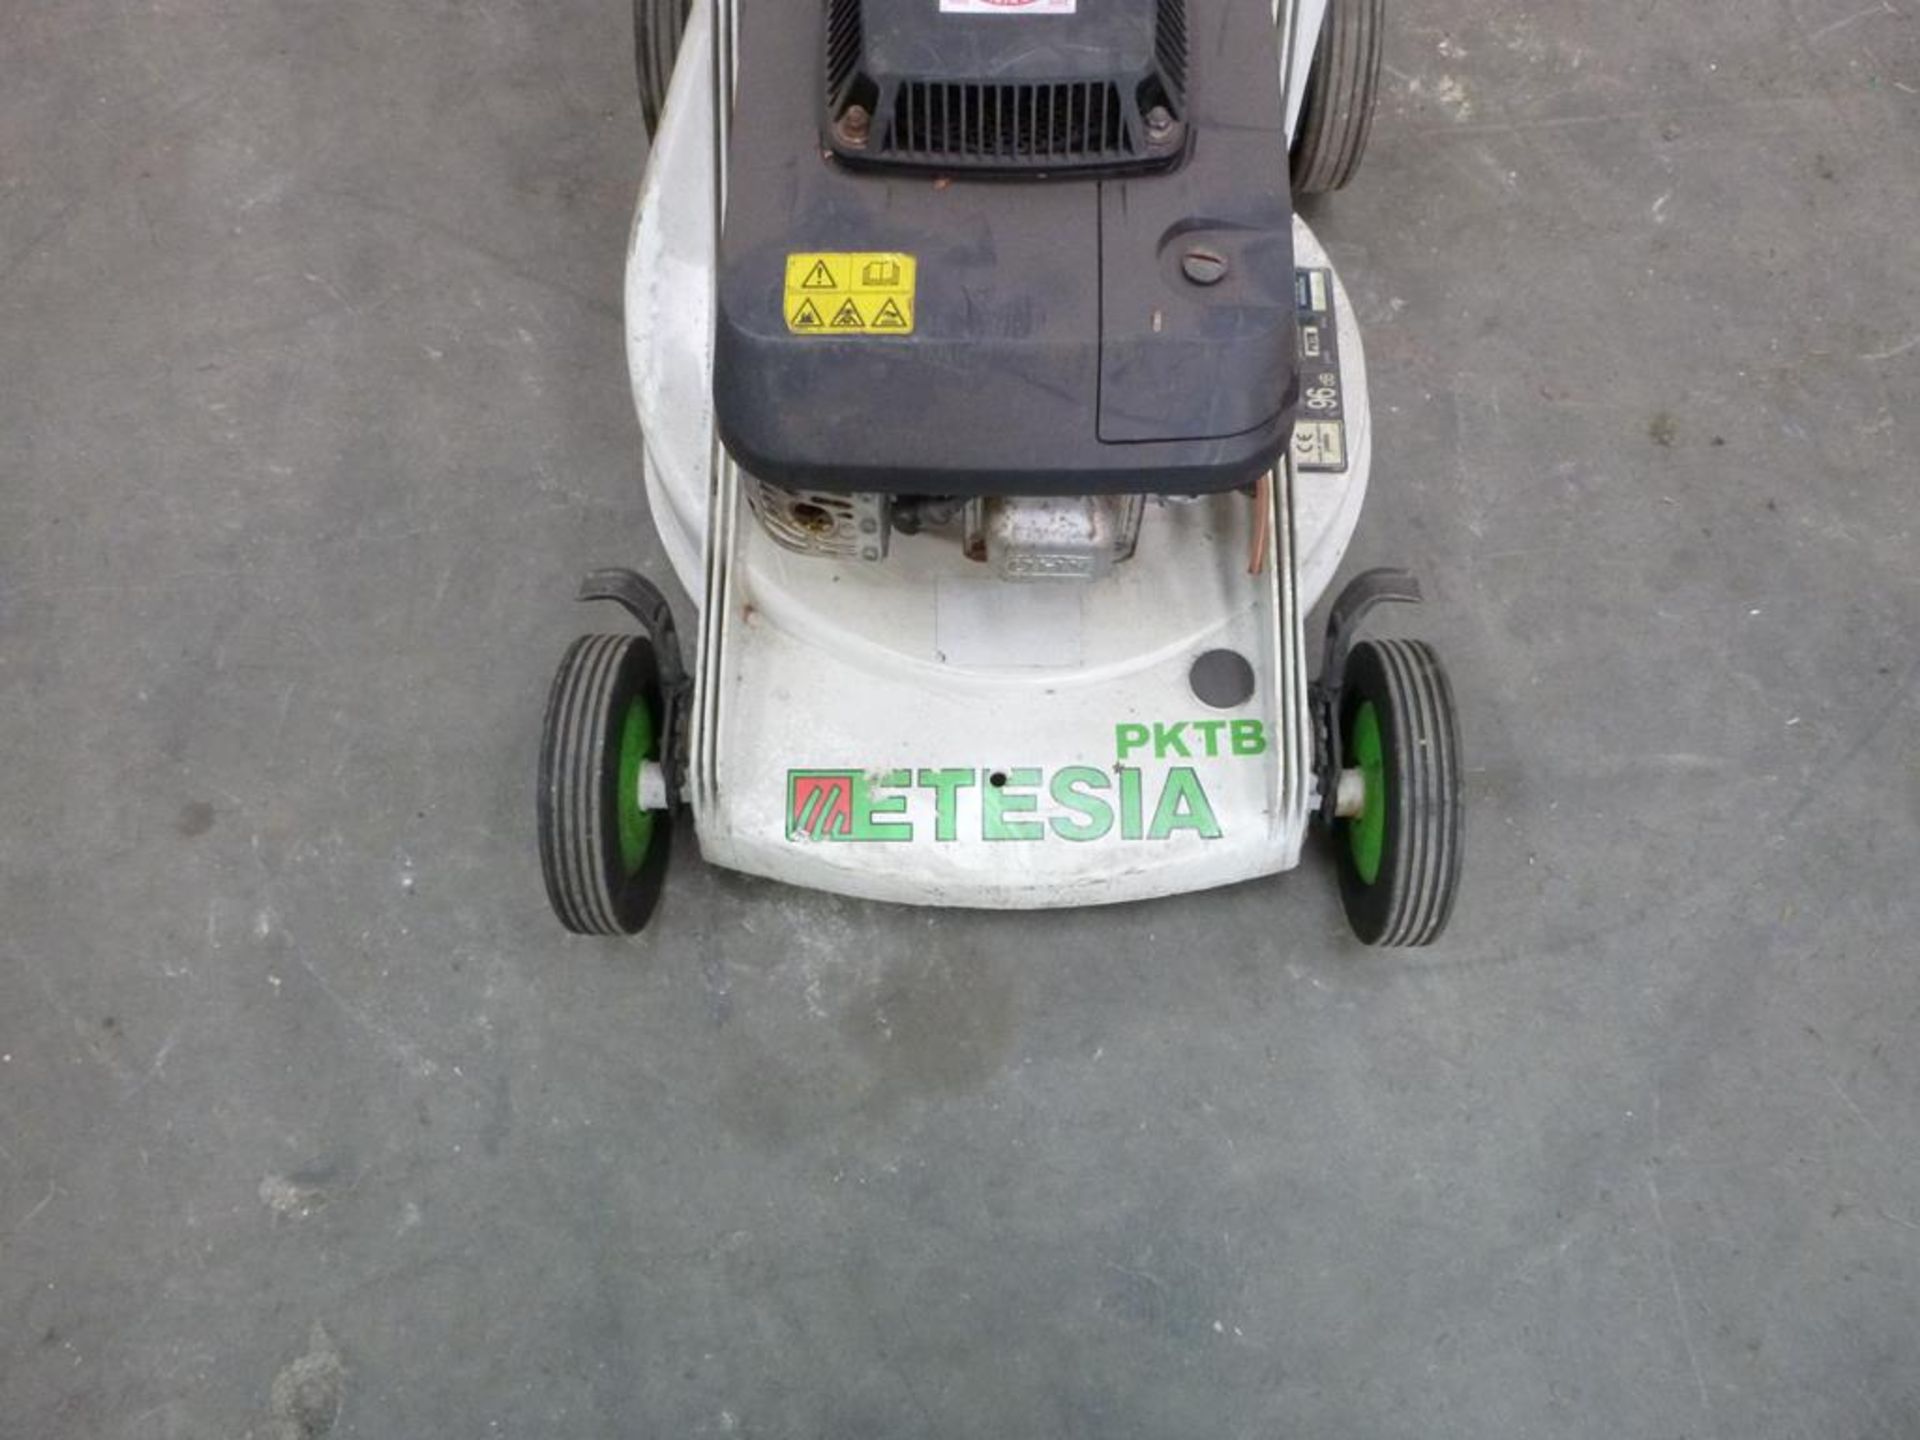 Trade In Etesia PKTB F-67160 Petrol Powered OHV Engine Lawnmower - Image 2 of 3